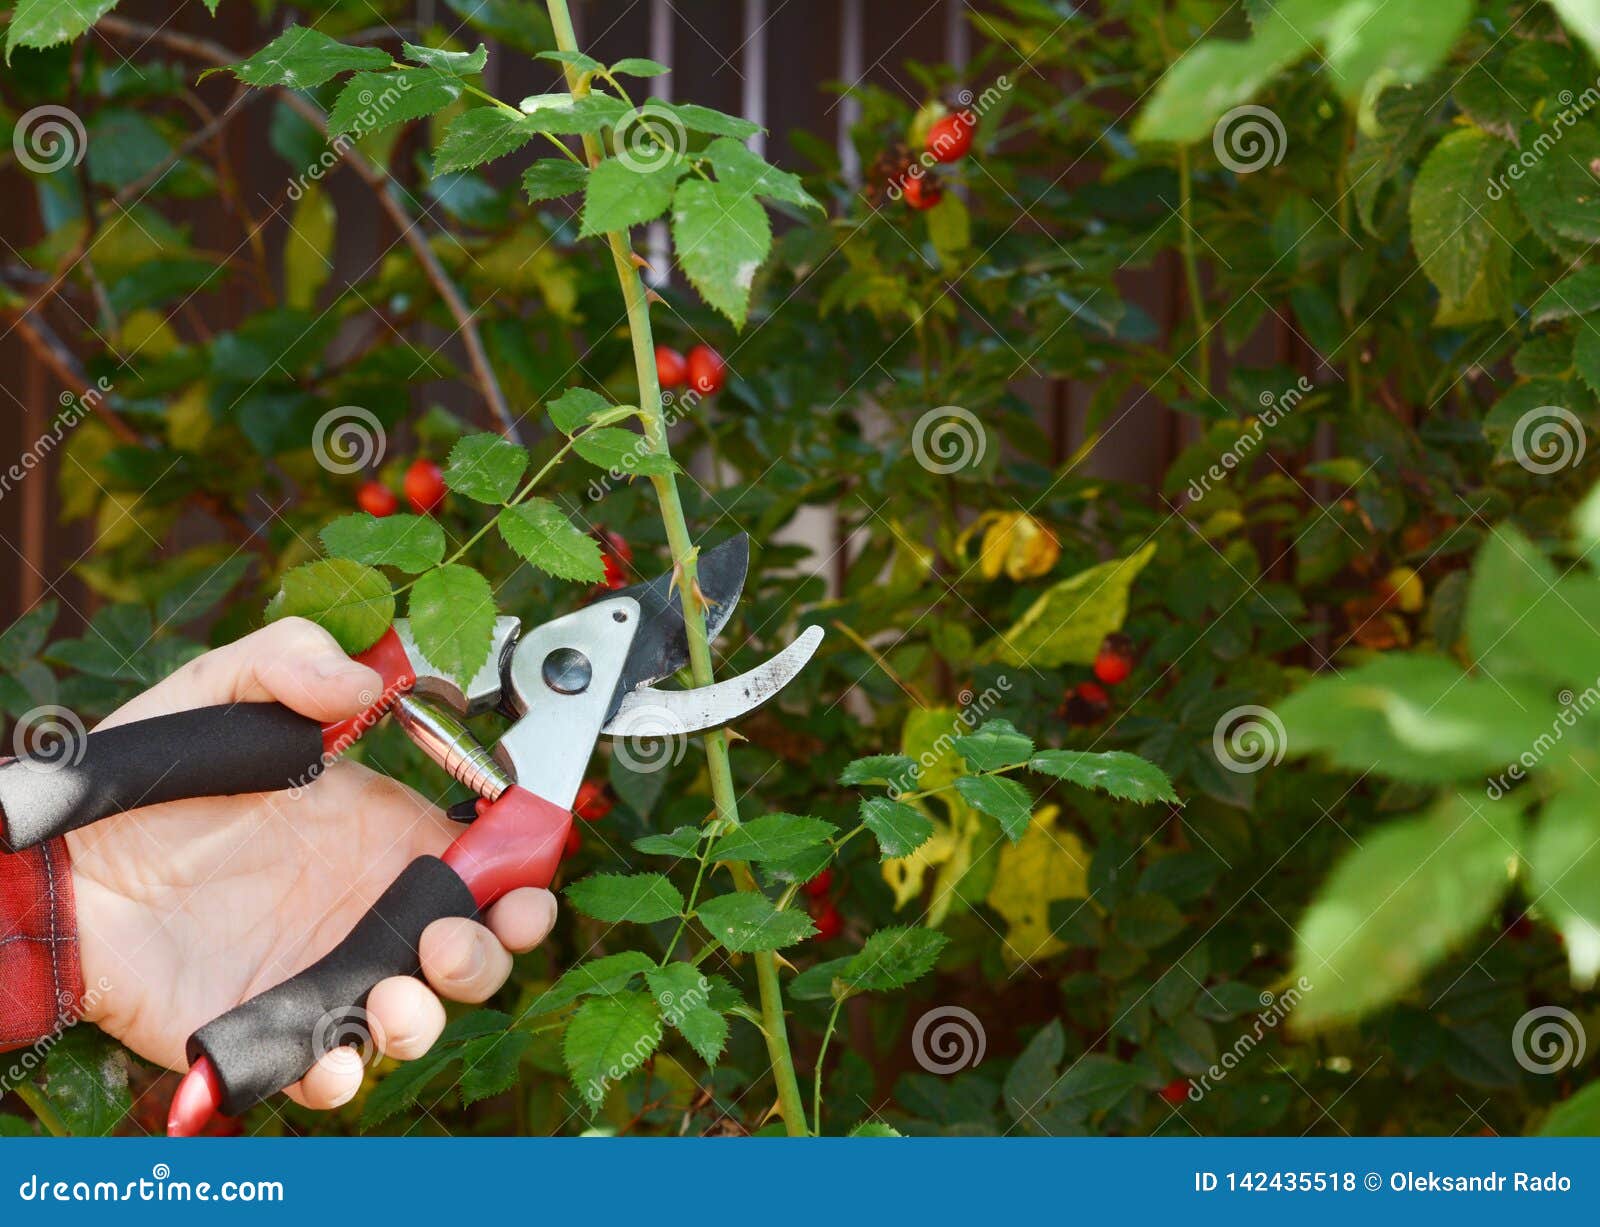 rose hip or rosehip, also called rose haw and rose hep  pruning with garden pruning scissors